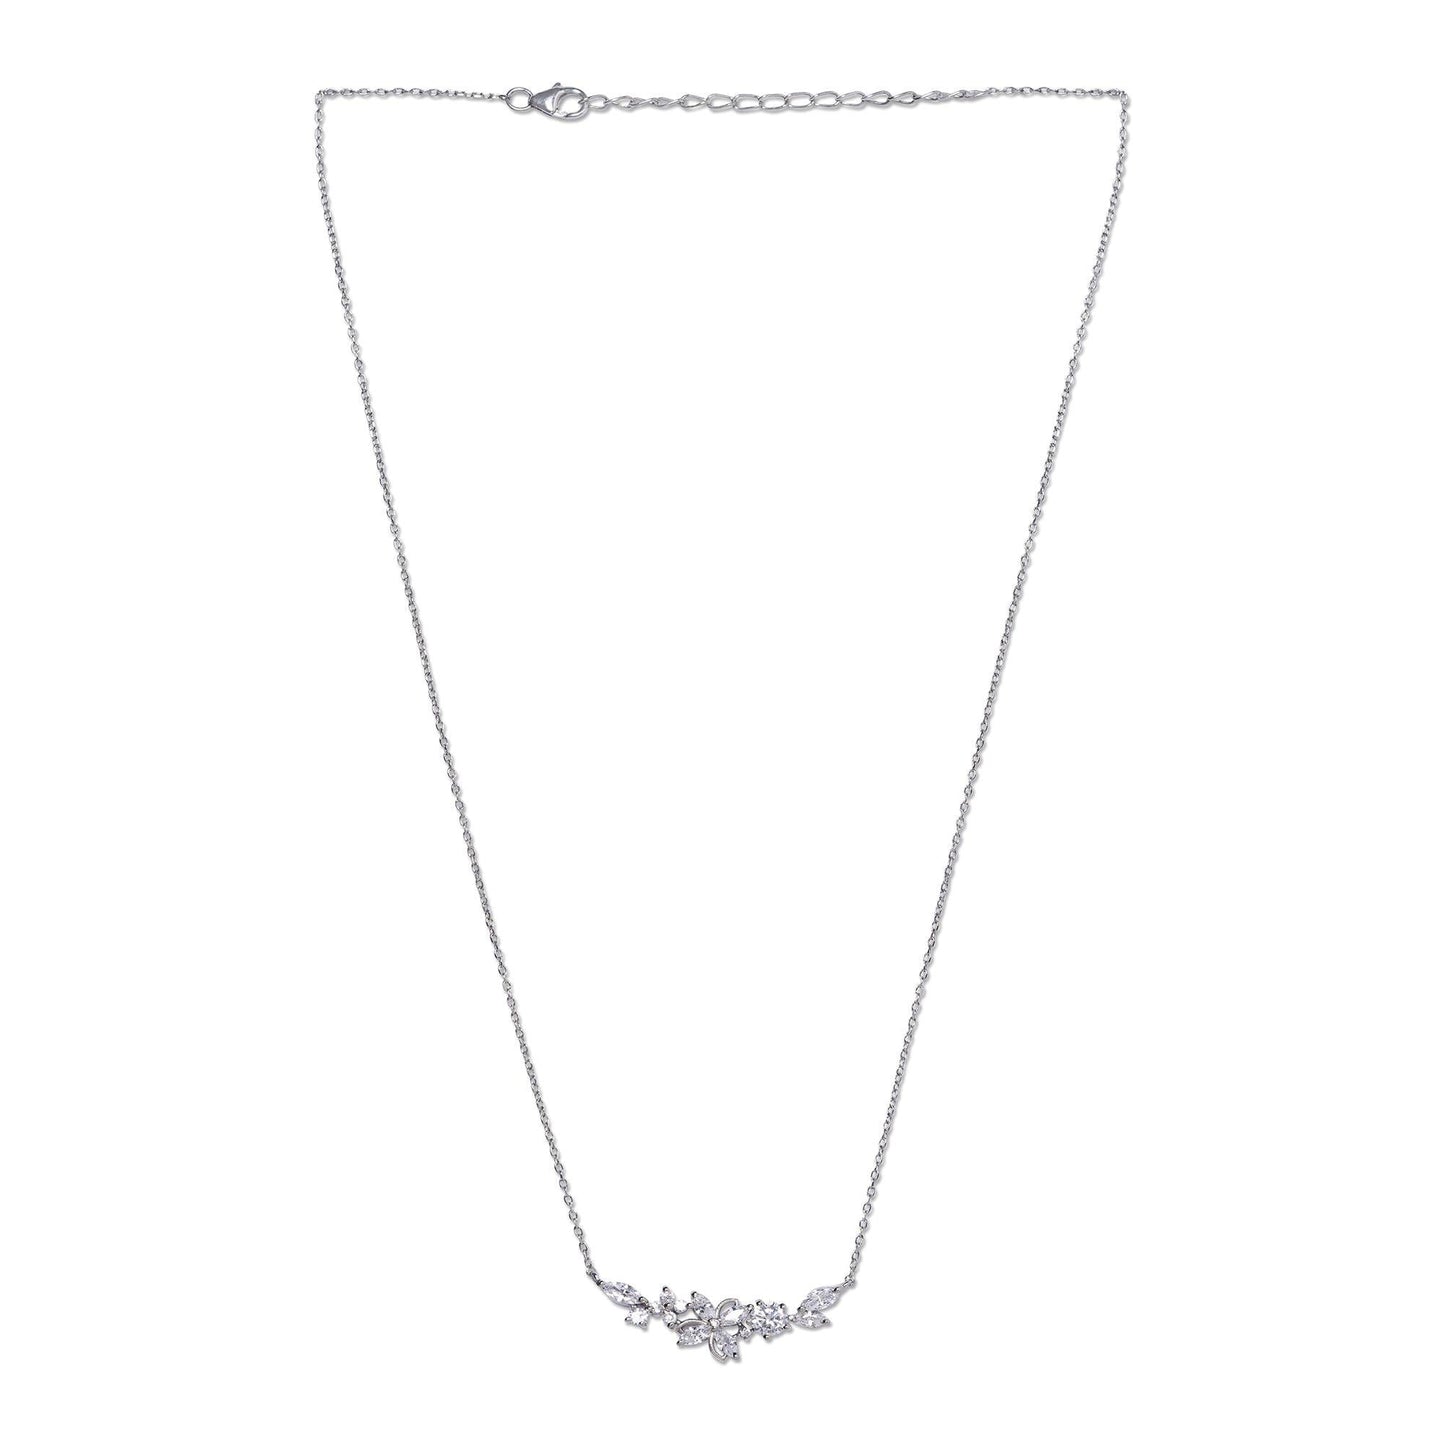 Silver Blossom Beauty Necklace - ornul